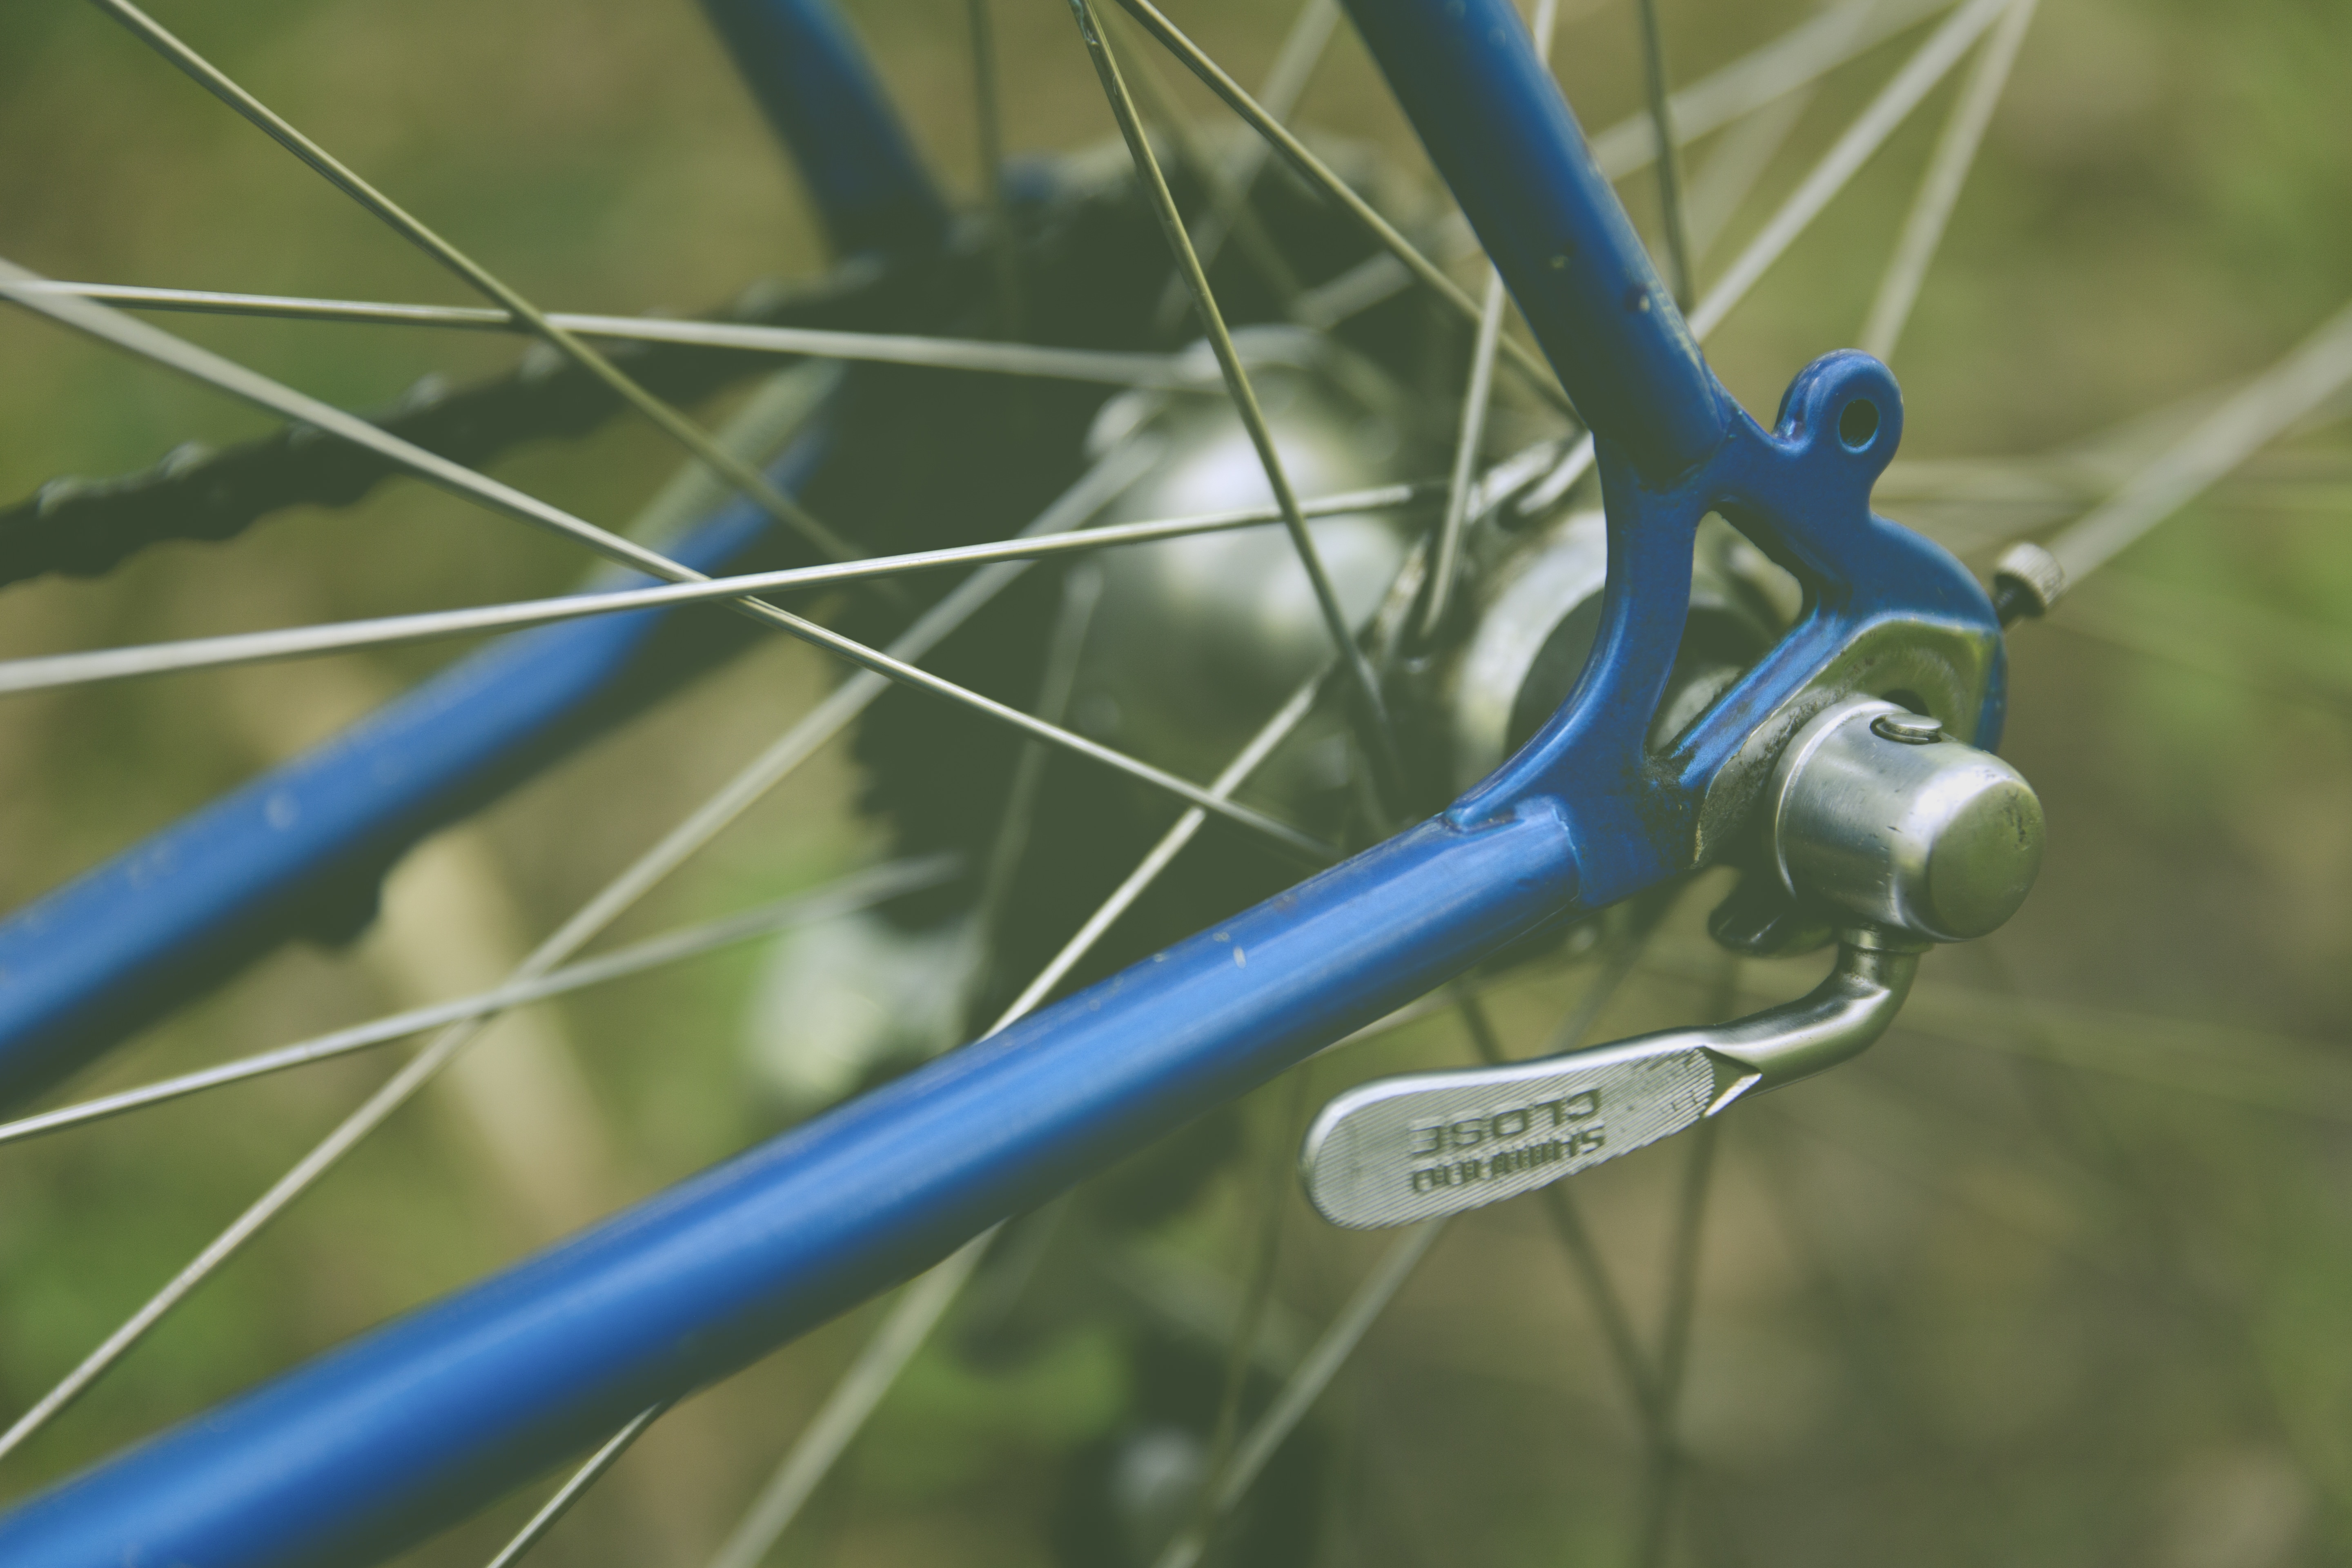 blue and silver bicycle component